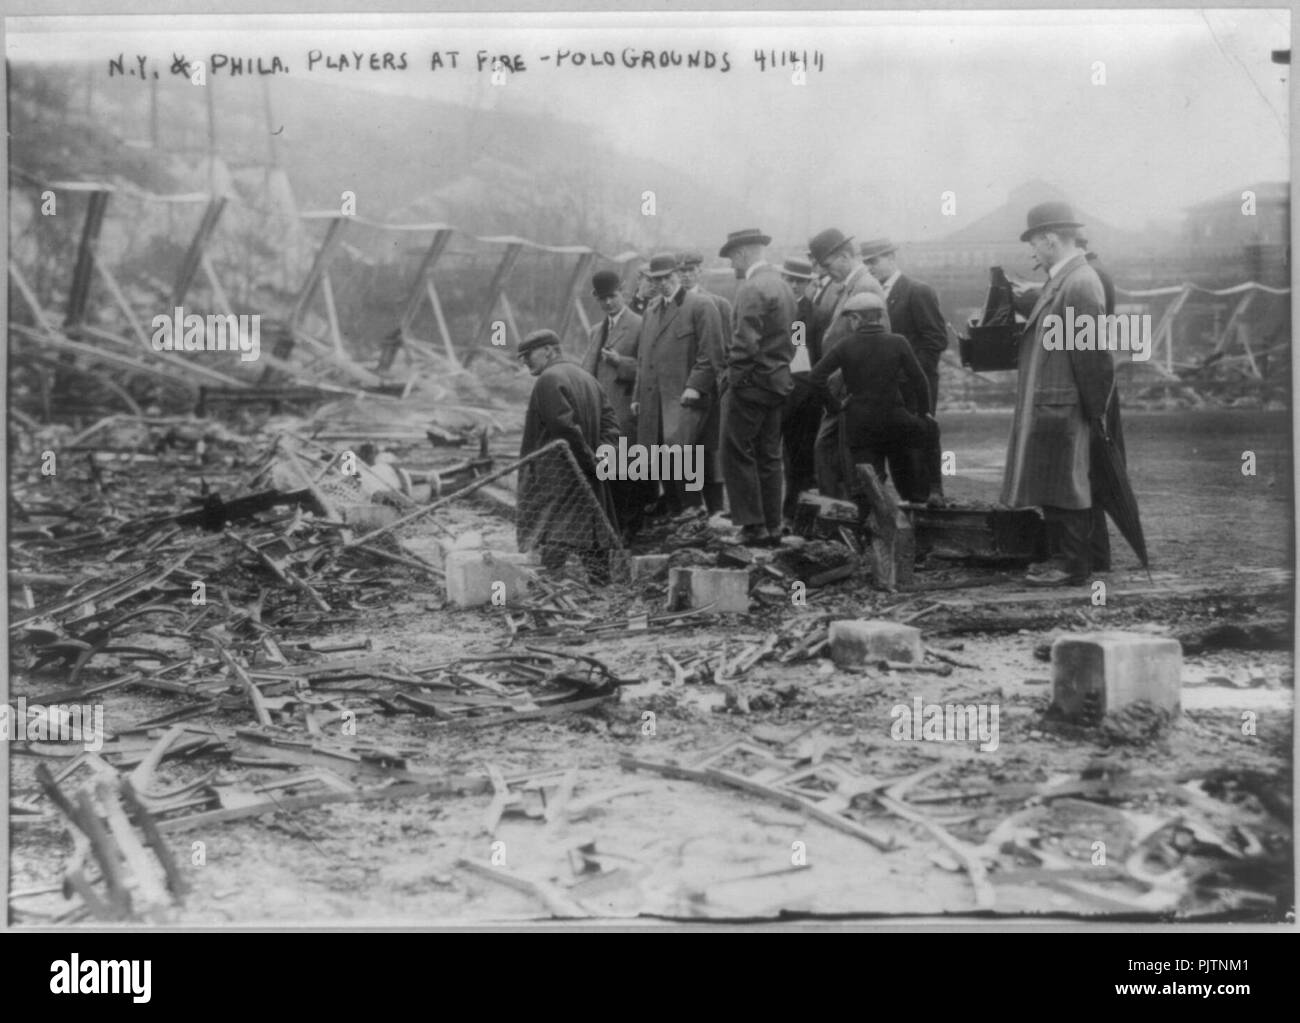 Baseball Parks - N.Y. and Phila. players at site of fire - Polo Grounds, NYC, April 14, 1911 Stock Photo